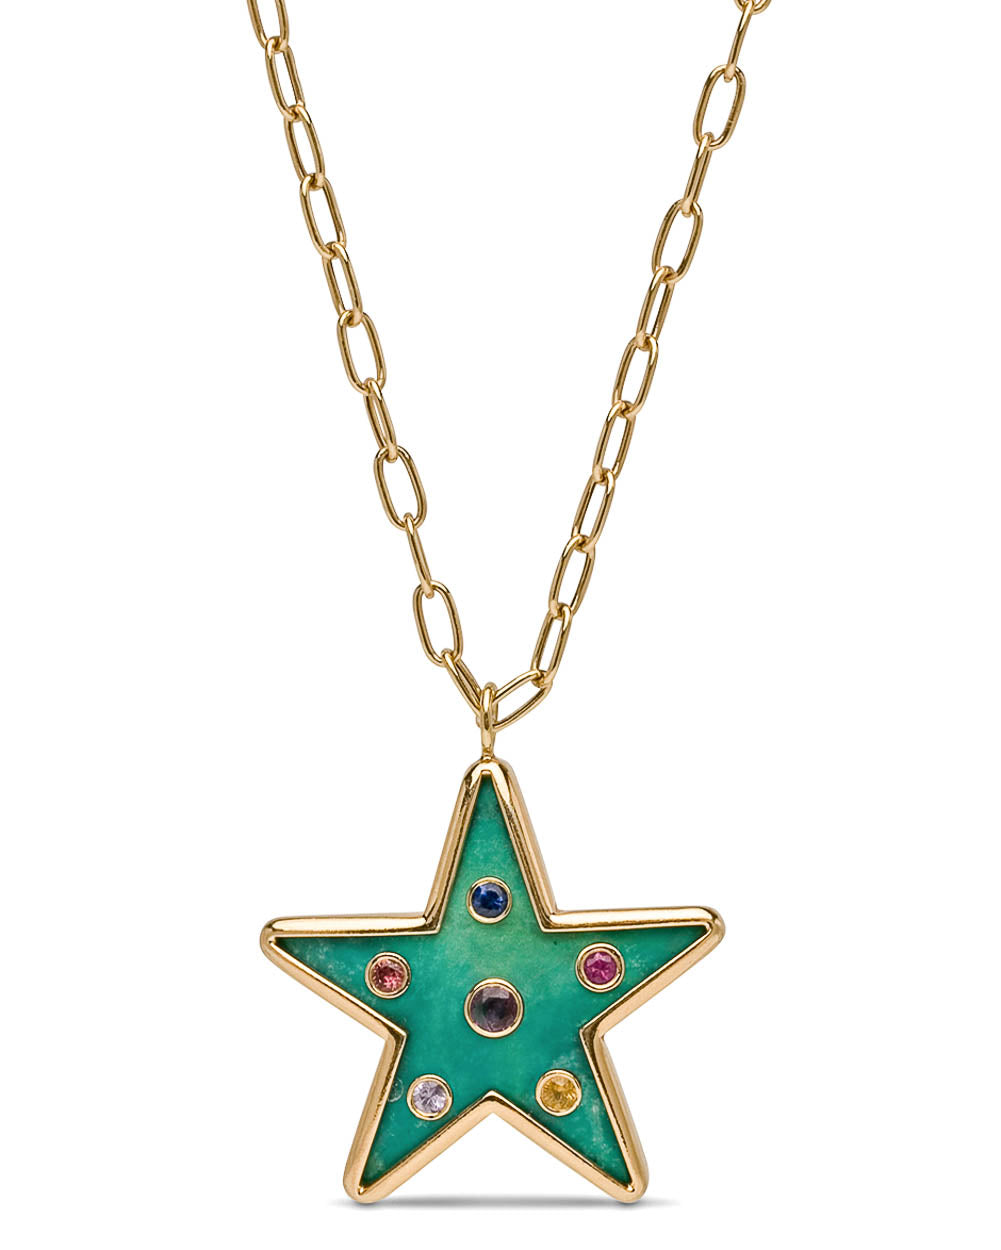 Yellow Gold and Turquoise Star Pendant Necklace